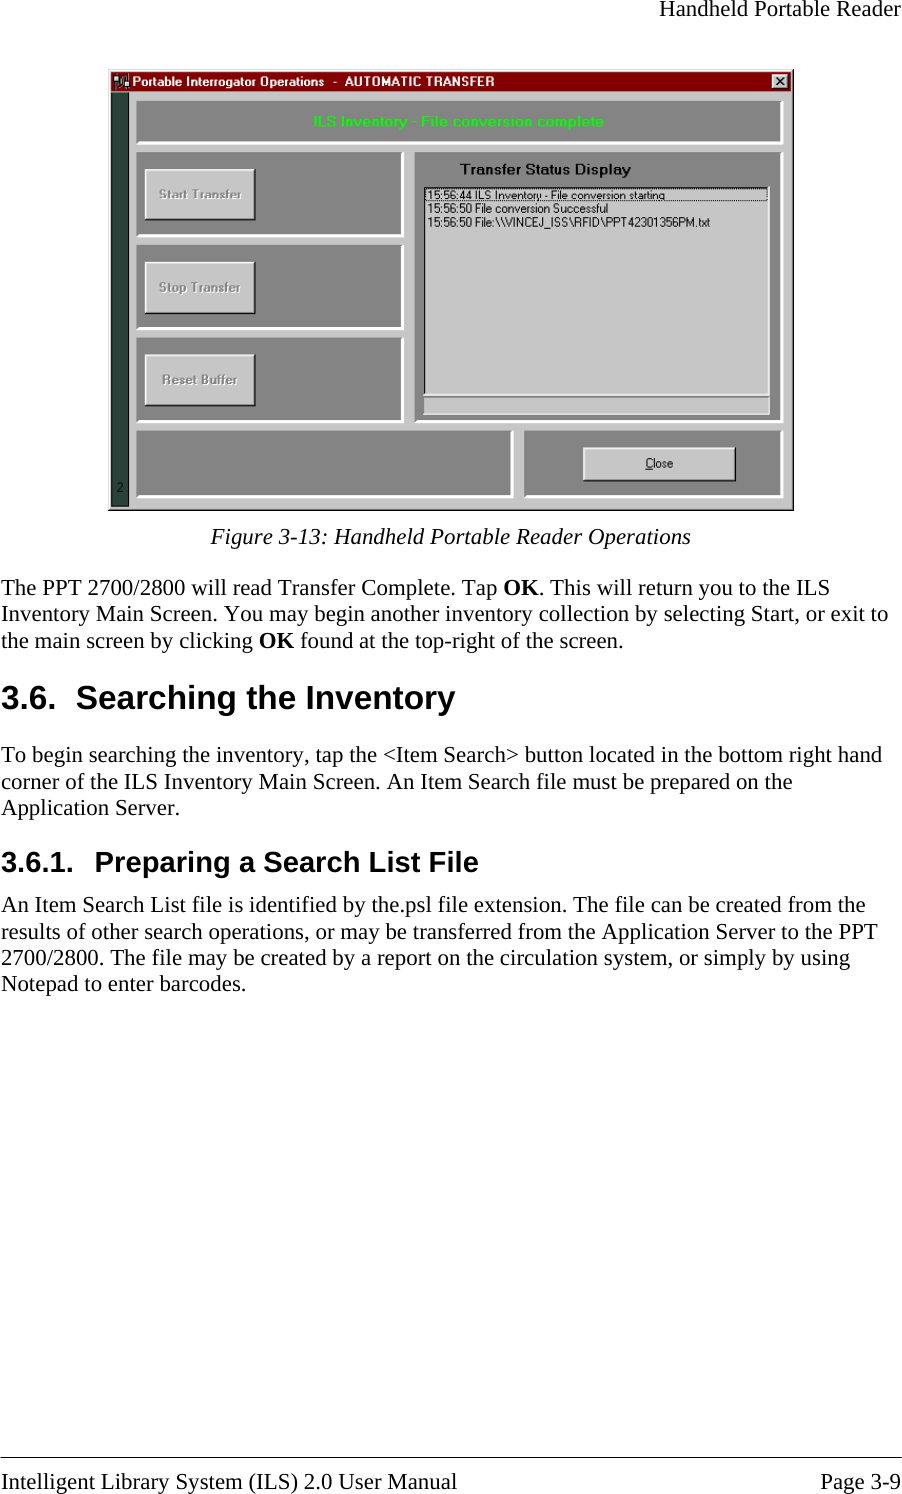     Handheld Portable Reader    Figure 3- erations ory d on the pplication Server. arch List File An Item Search List file is identified by the.psl file extension. The file can be created from the results of other search operations, or may be transferred from the Application Server to the PPT 2700/2800. The file may be created by a report on the circulation system, or simply by using Notepad to enter barcodes. 13: Handheld Portable Reader OpThe PPT 2700/2800 will read Transfer Complete. Tap OK. This will return you to the ILS Inventory Main Screen. You may begin another inventory collection by selecting Start, or exit to the main screen by clicking OK found at the top-right of the screen. 3.6.  Searching the InventTo begin searching the inventory, tap the &lt;Item Search&gt; button located in the bottom right hand corner of the ILS Inventory Main Screen. An Item Search file must be prepareA3.6.1.  Preparing a Se Intelligent Library System (ILS) 2.0 User Manual  Page 3-9 